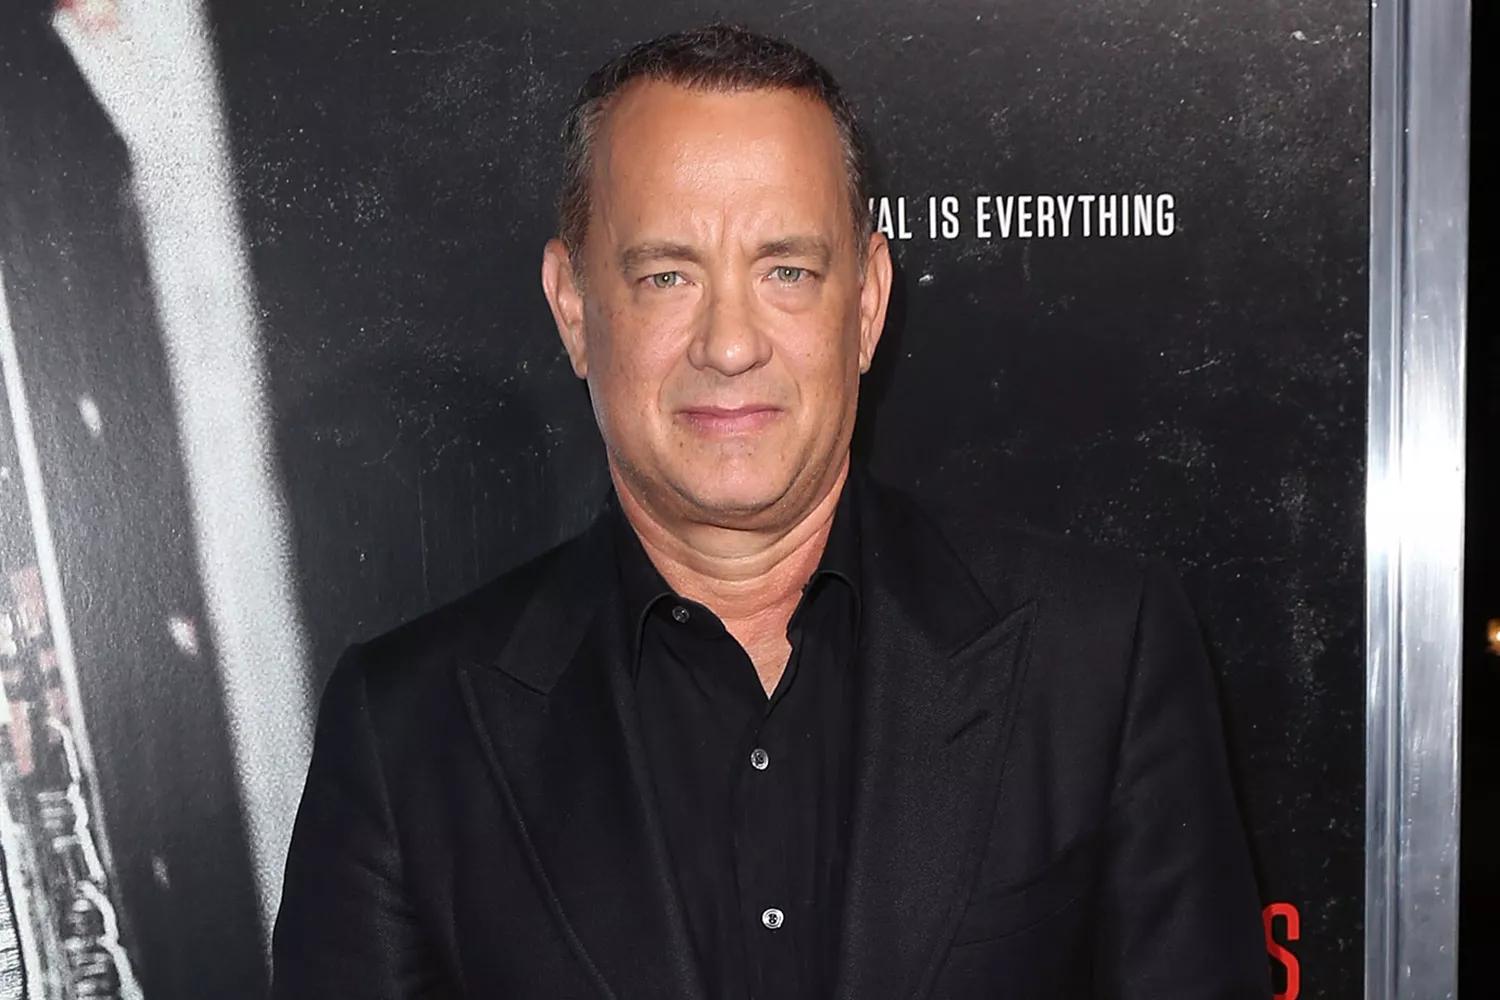 Tom Hanks Speaks Out: The Star Warns Fans About Unauthorized AI Version in Dental Ad